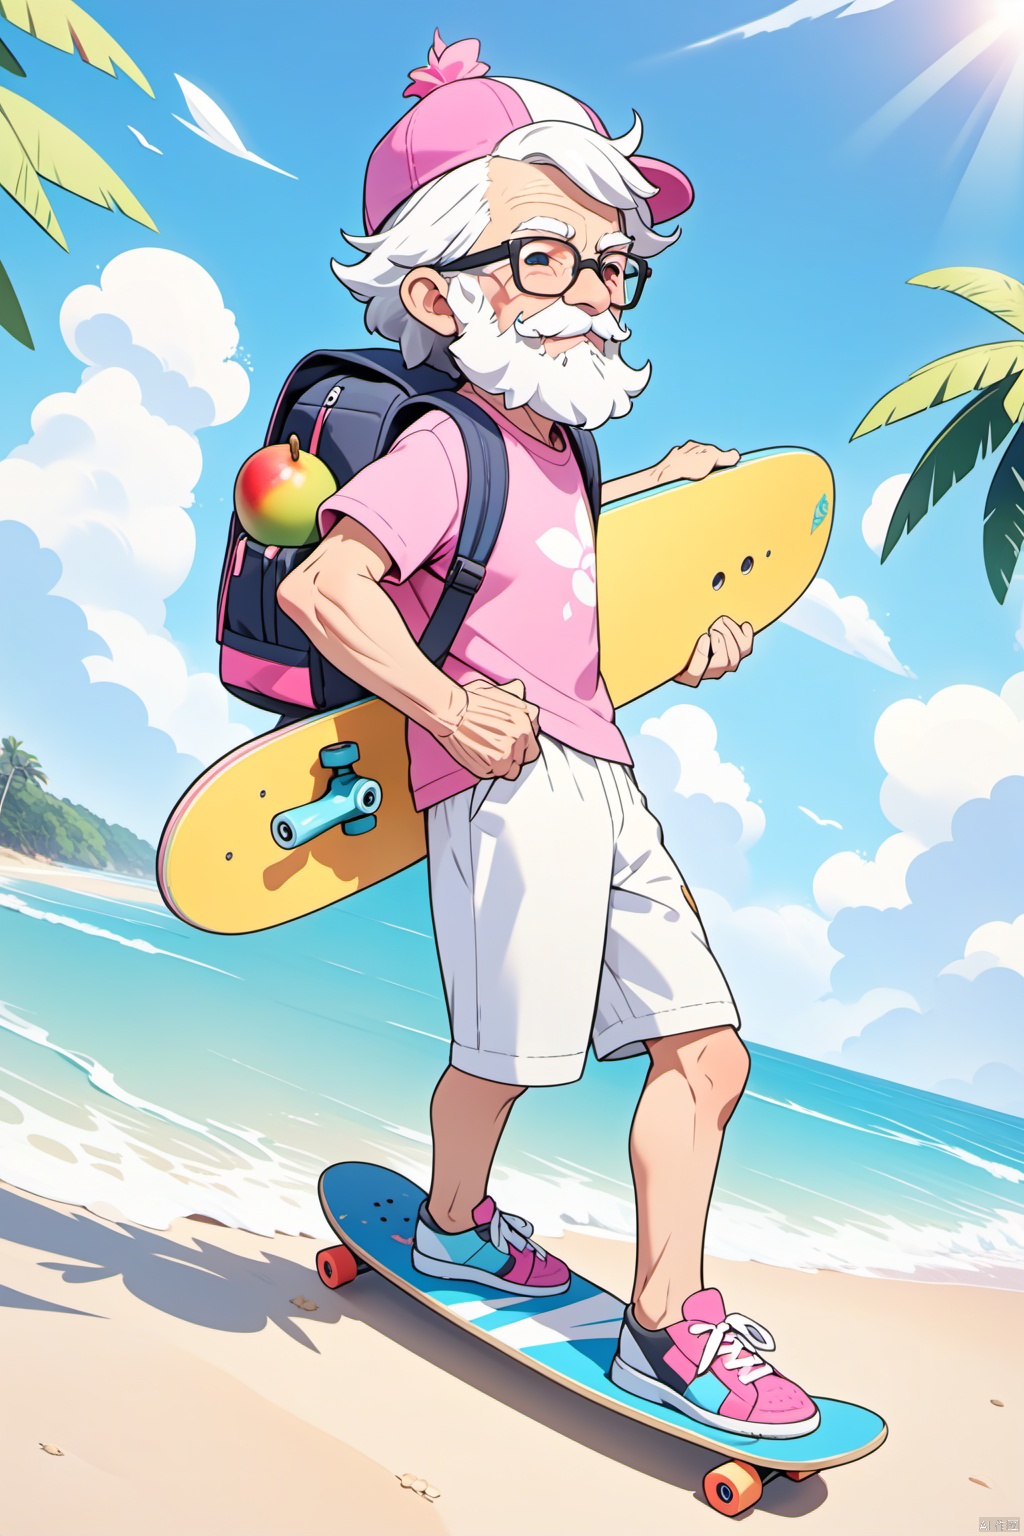  solo,(masterpiece),(best quality),The image showcases a vibrant 3D animated character,an elderly man with a white beard,wearing a pink cap,glasses,and a backpack. He's posed next to a colorful skateboard,exuding a relaxed and adventurous vibe,in summer,day,sky,sea,beach,on the beach,waves,cirrus,coconut tree,holding_mango,